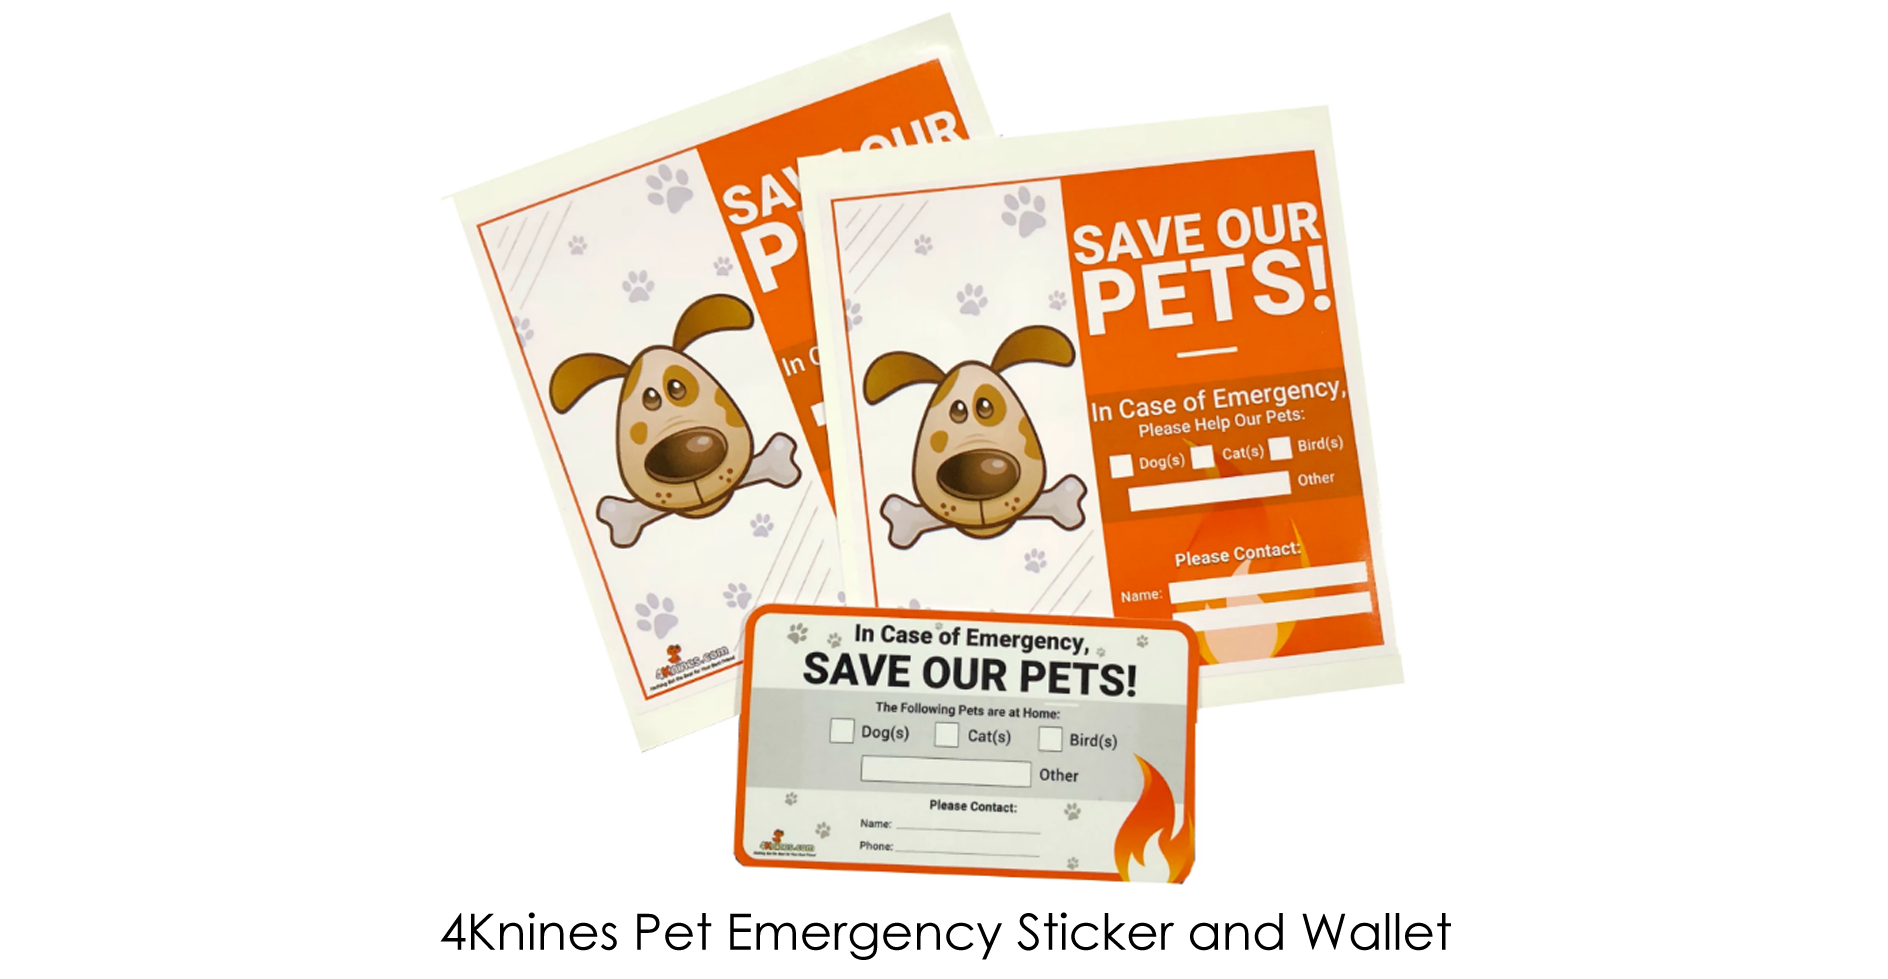 4Knines Pet Emergency Sticker and Wallet Card